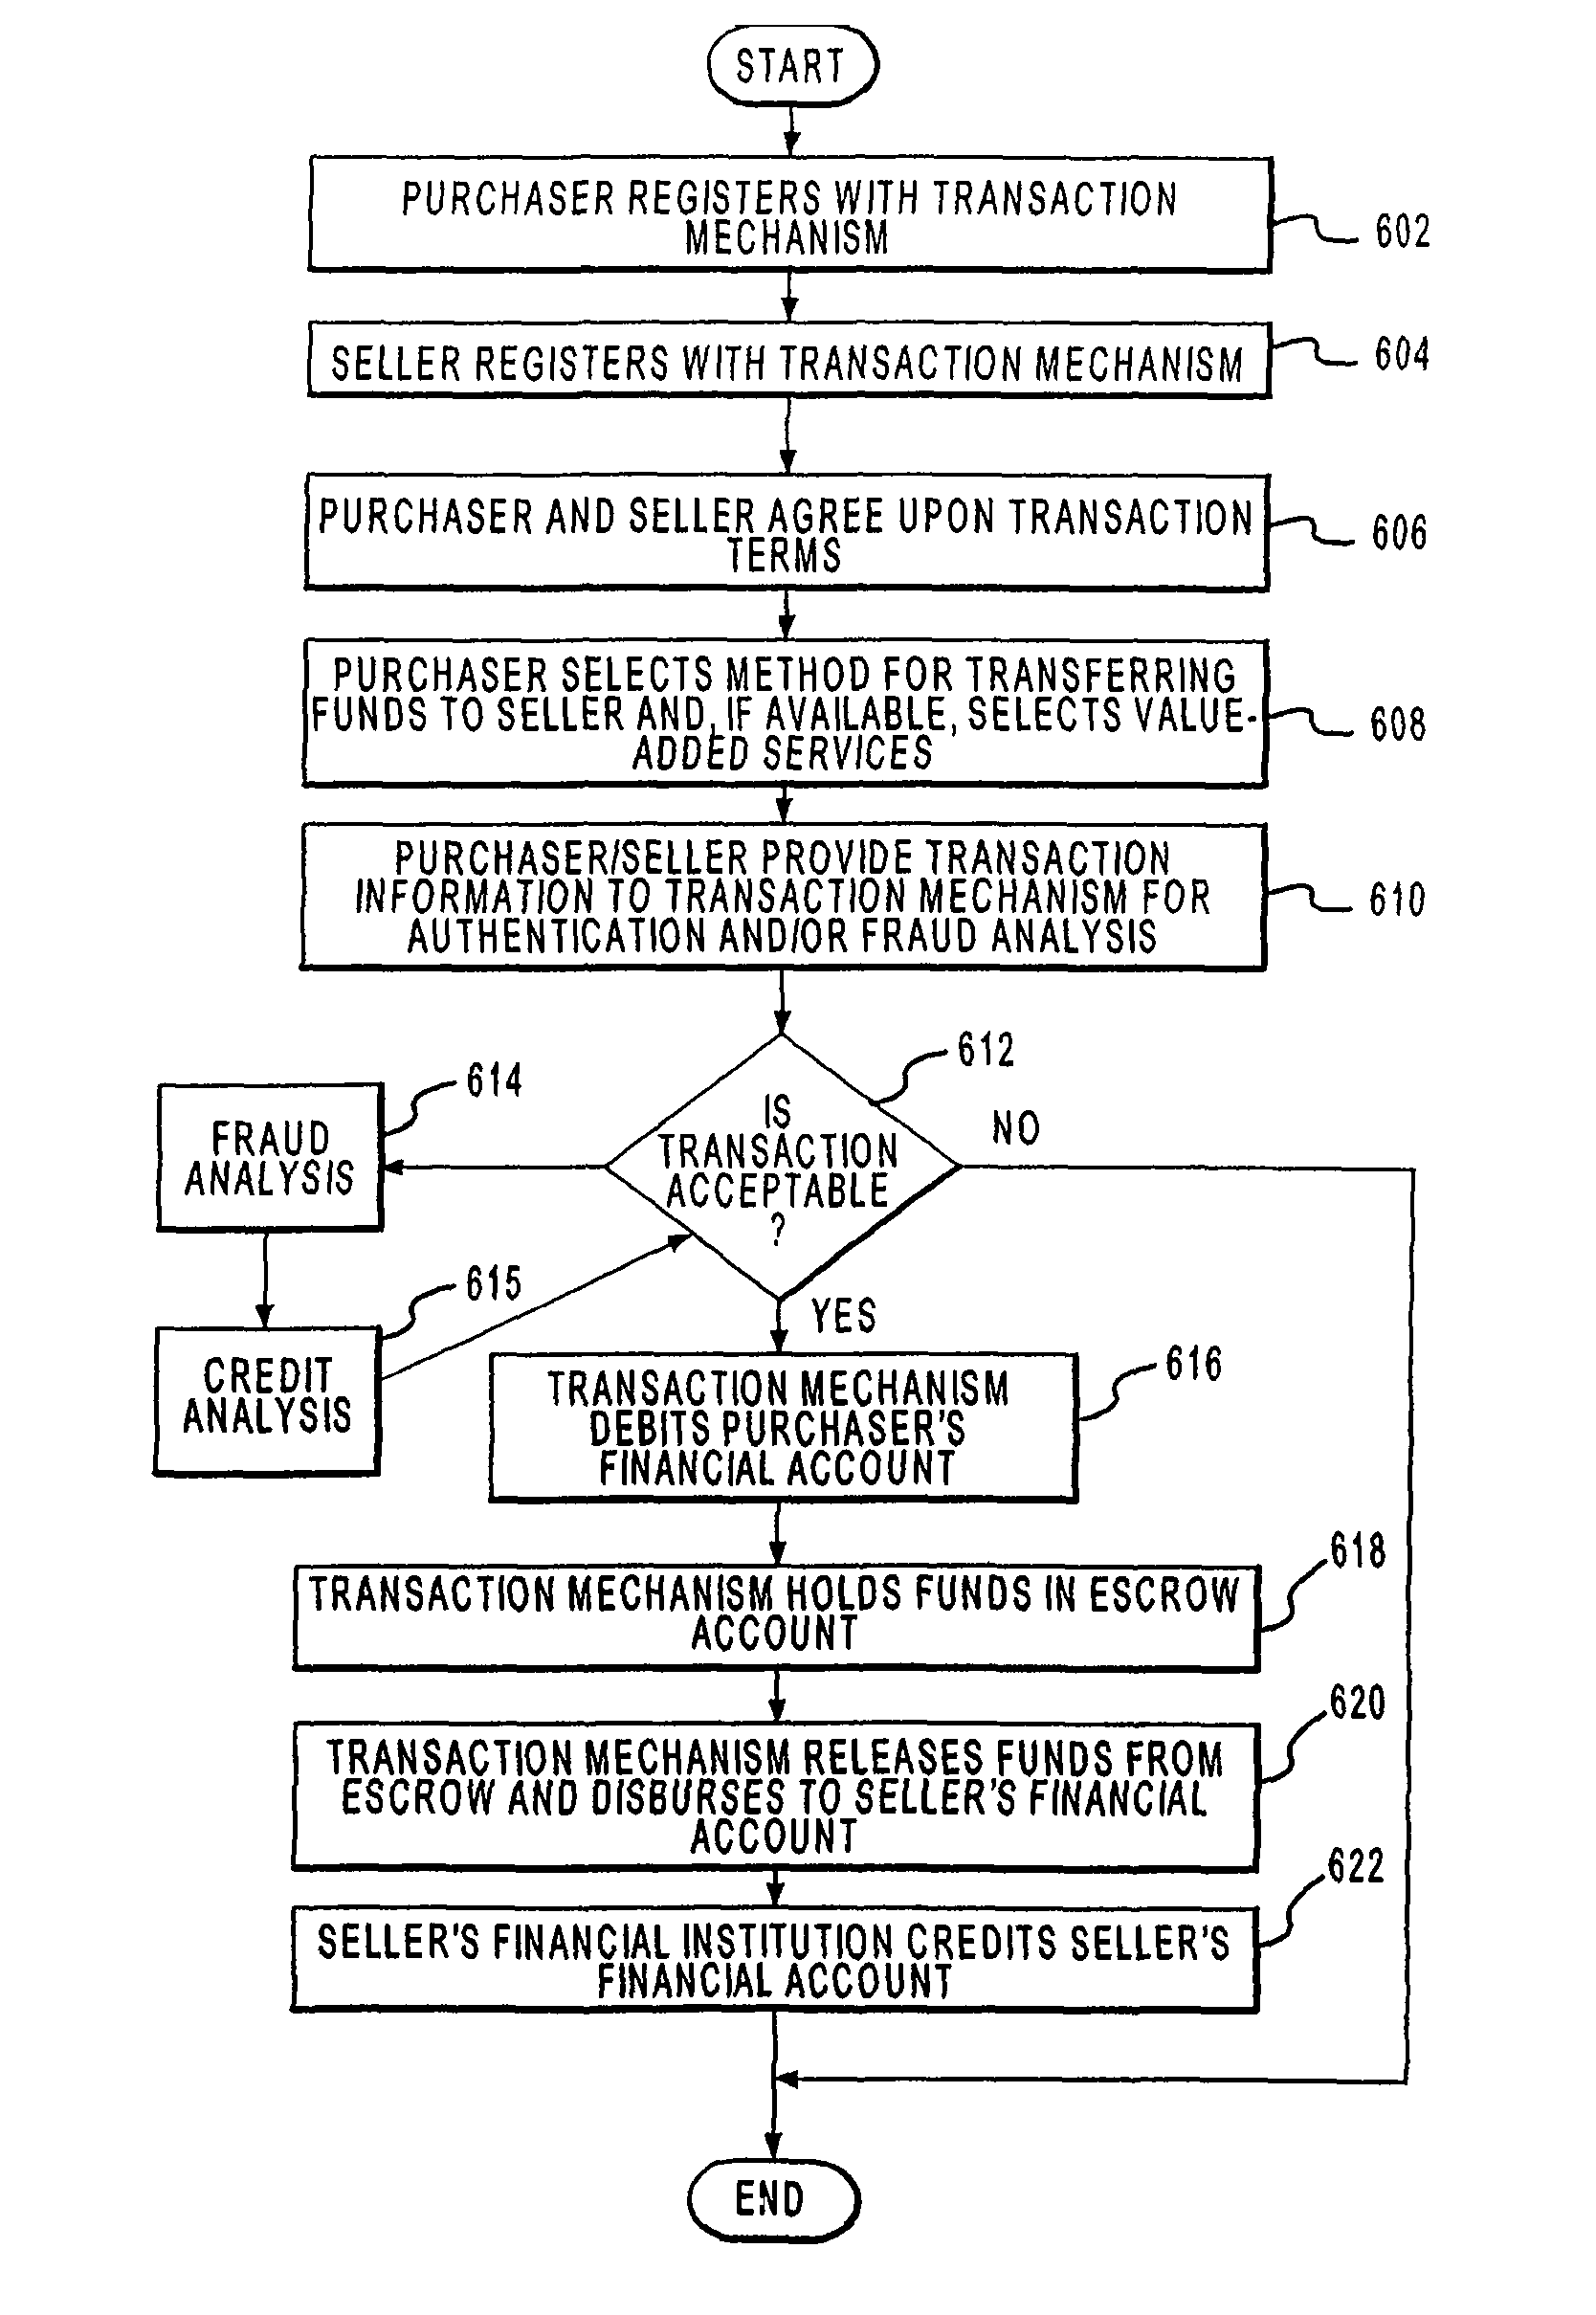 Systems and methods for adjusting crediting limits to facilitate transactions